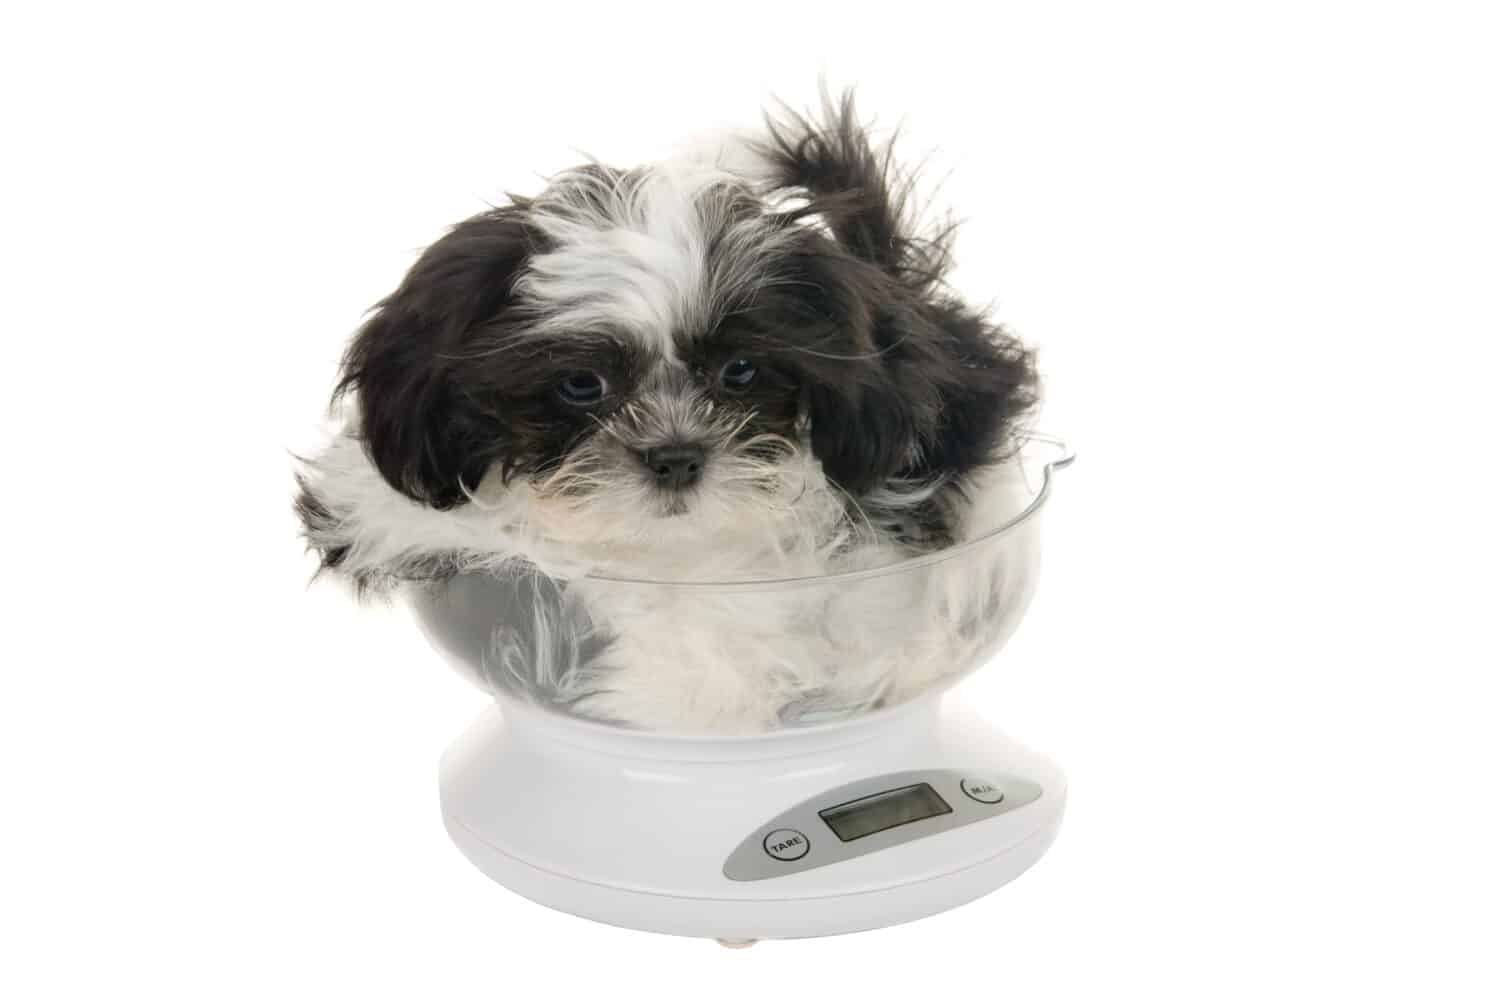 A precious little Shih Tzu puppy is being weighed on an ounce scale.